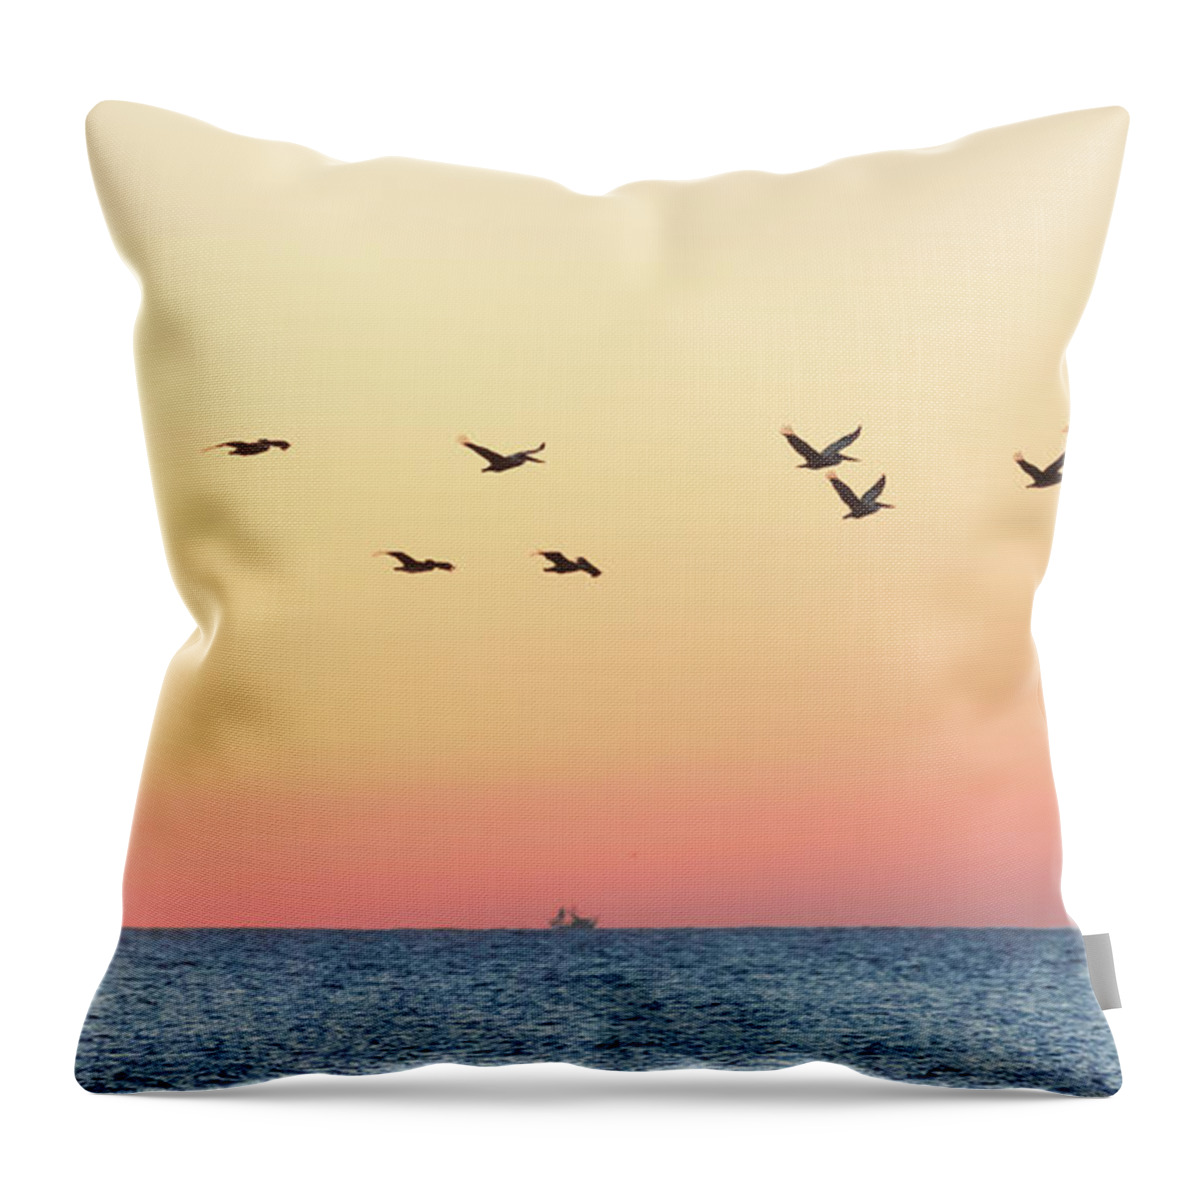 Sunrise Throw Pillow featuring the photograph A Dozen Pelicans Flying over the Ocean by Robert Loe